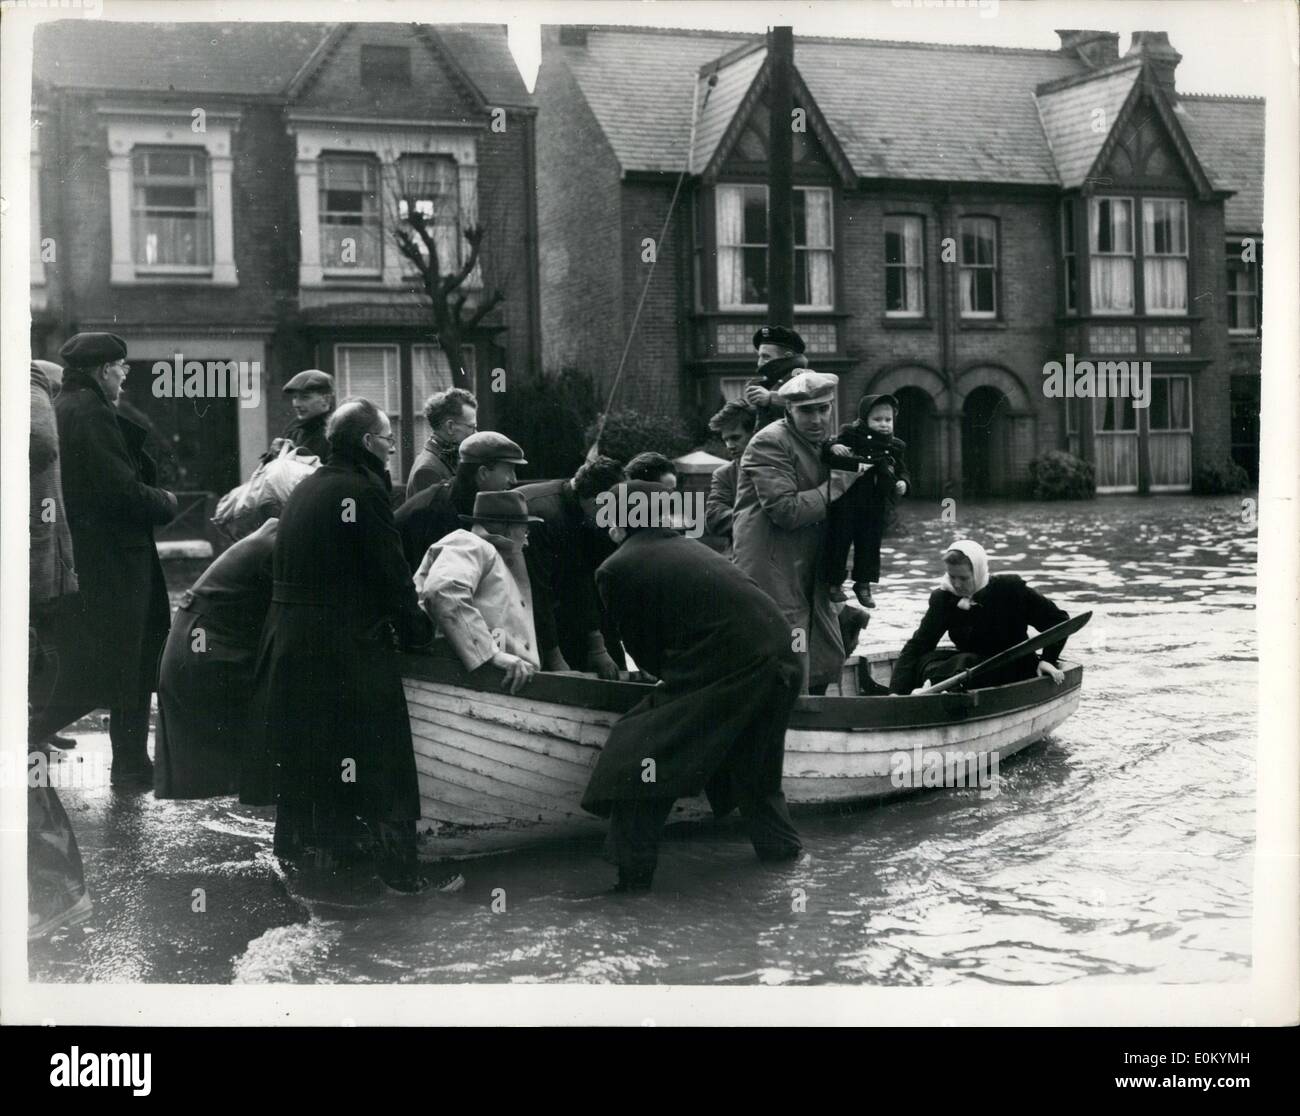 Feb. 02, 1953 - Floods Along the Kenneth Coast Rowing Boats Rescue Victims At Whitstable: Photo shows The scene as flood victims are rescued by rowing boat - during the high master at Whitstable, Kent. Stock Photo